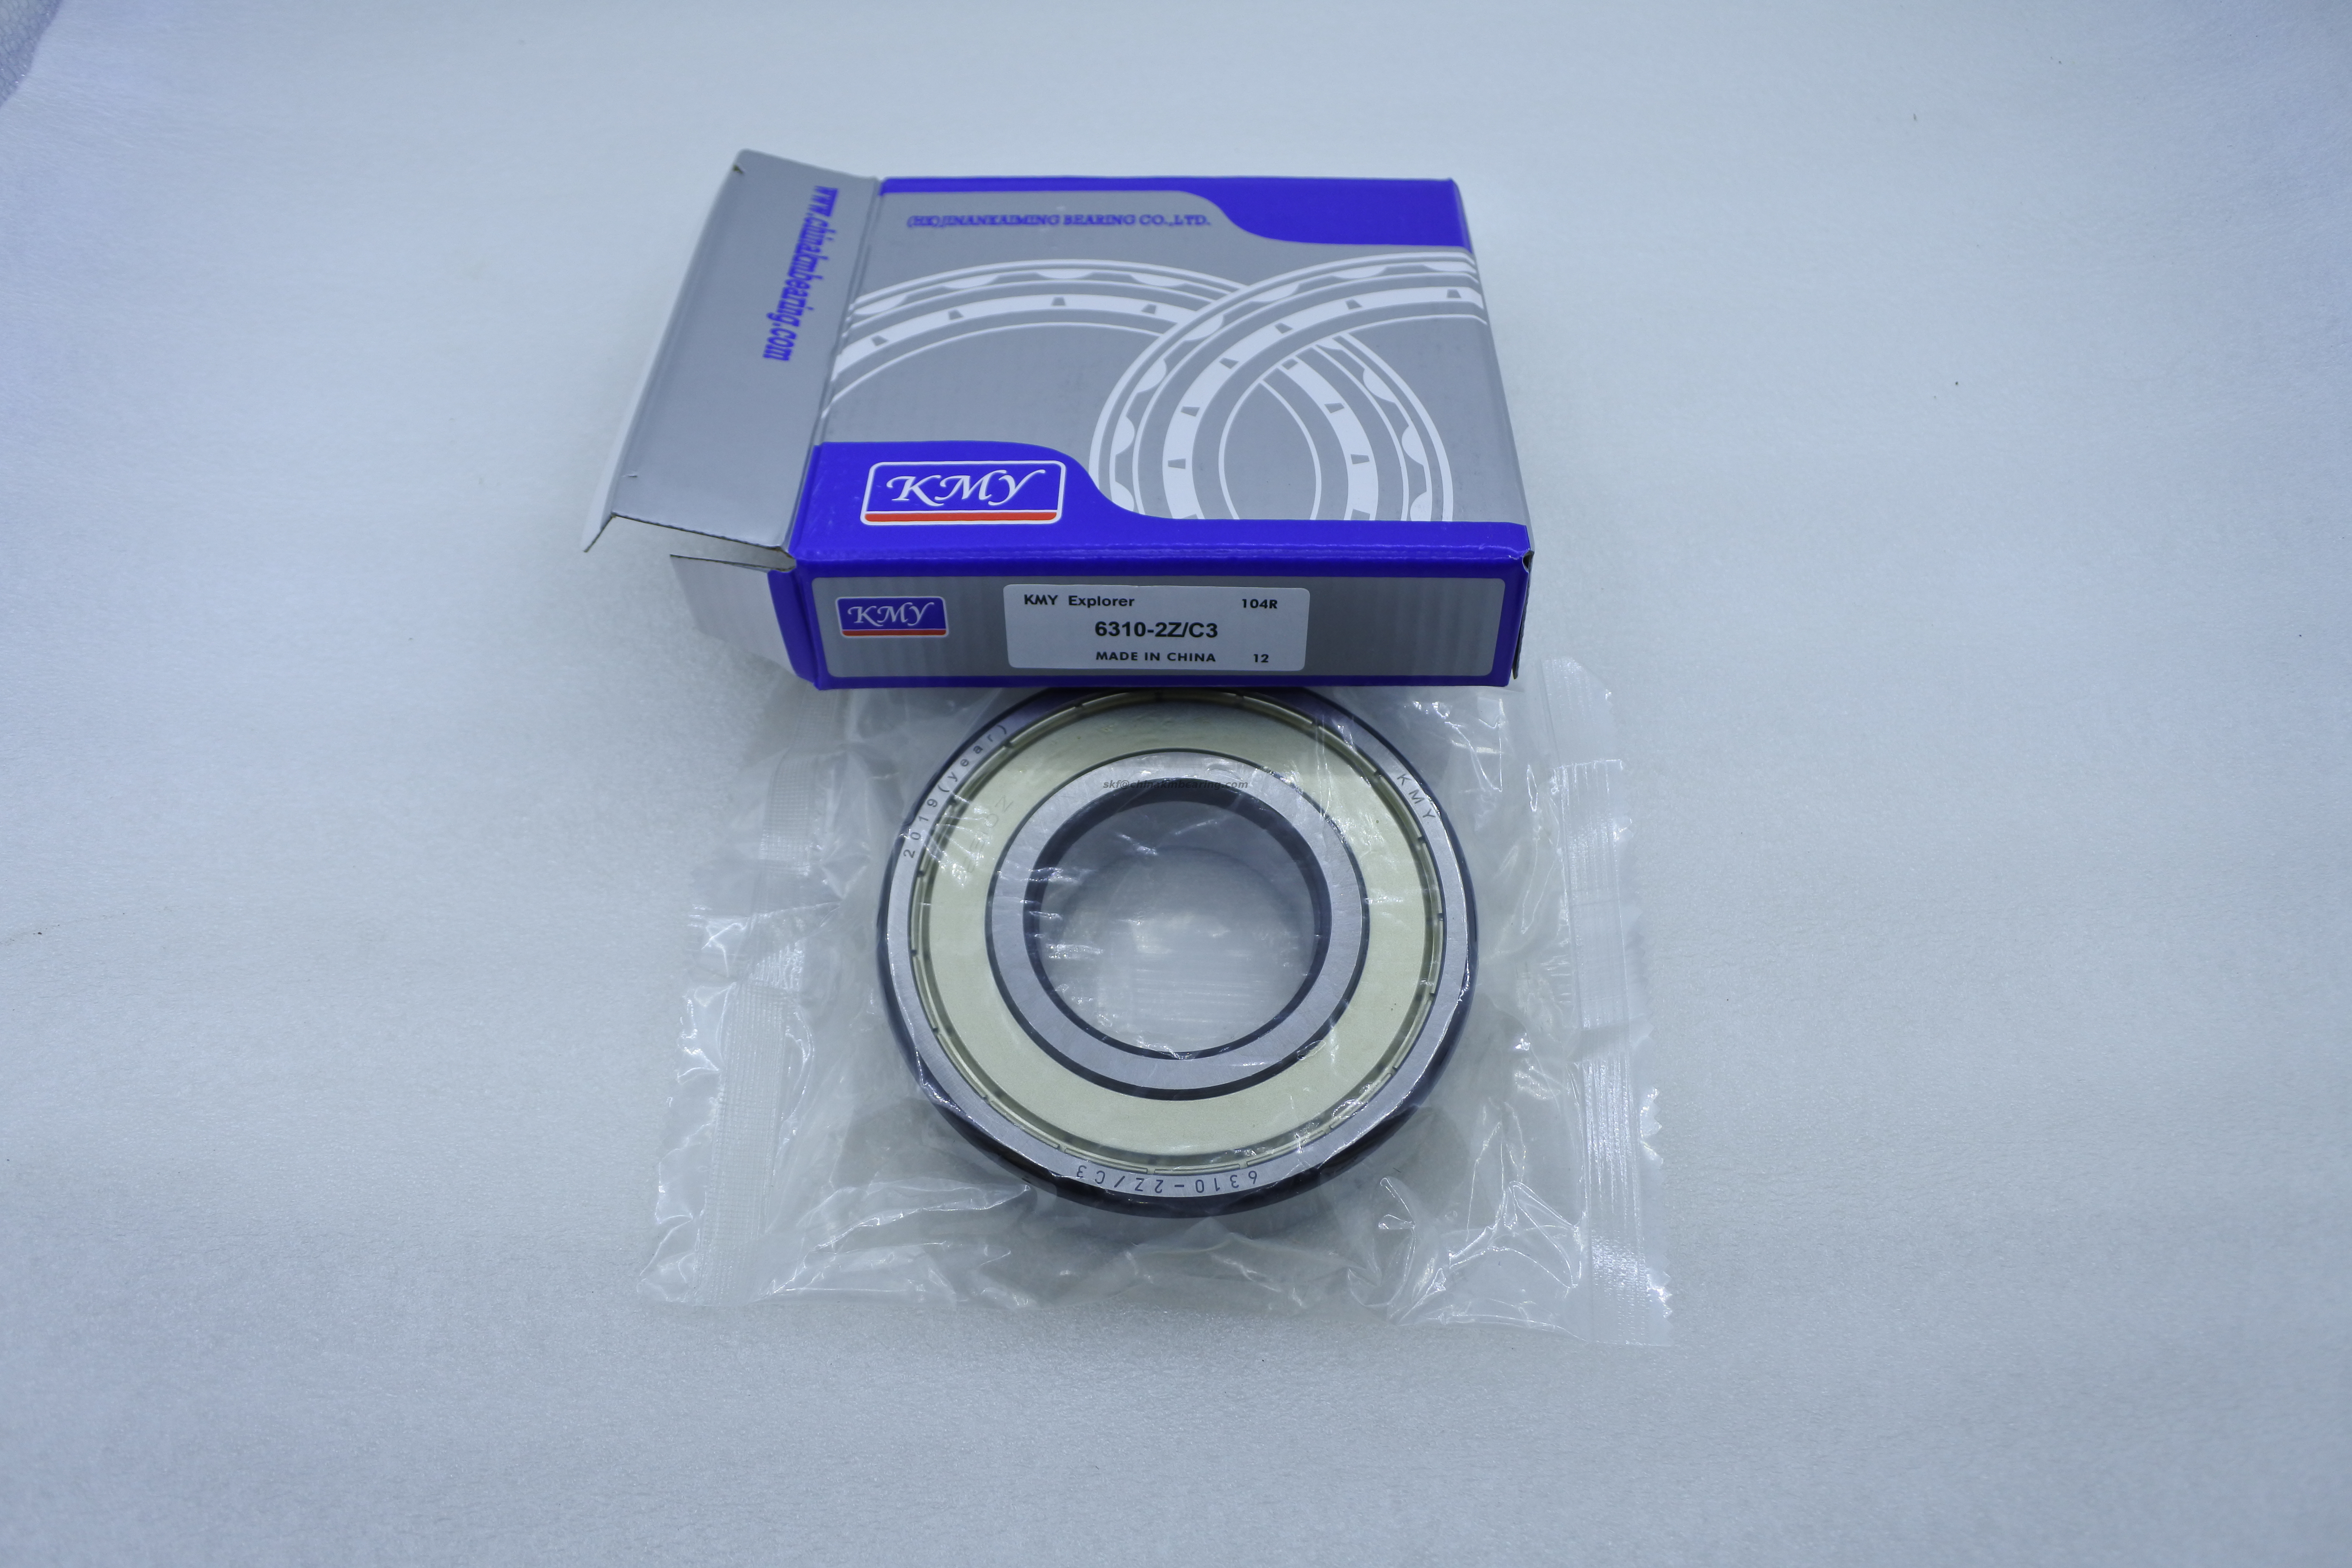 Factory Outlet 623zz 626zz 629zz For Machine Fast Delivery Deep Groove Ball Bearing Bearing 